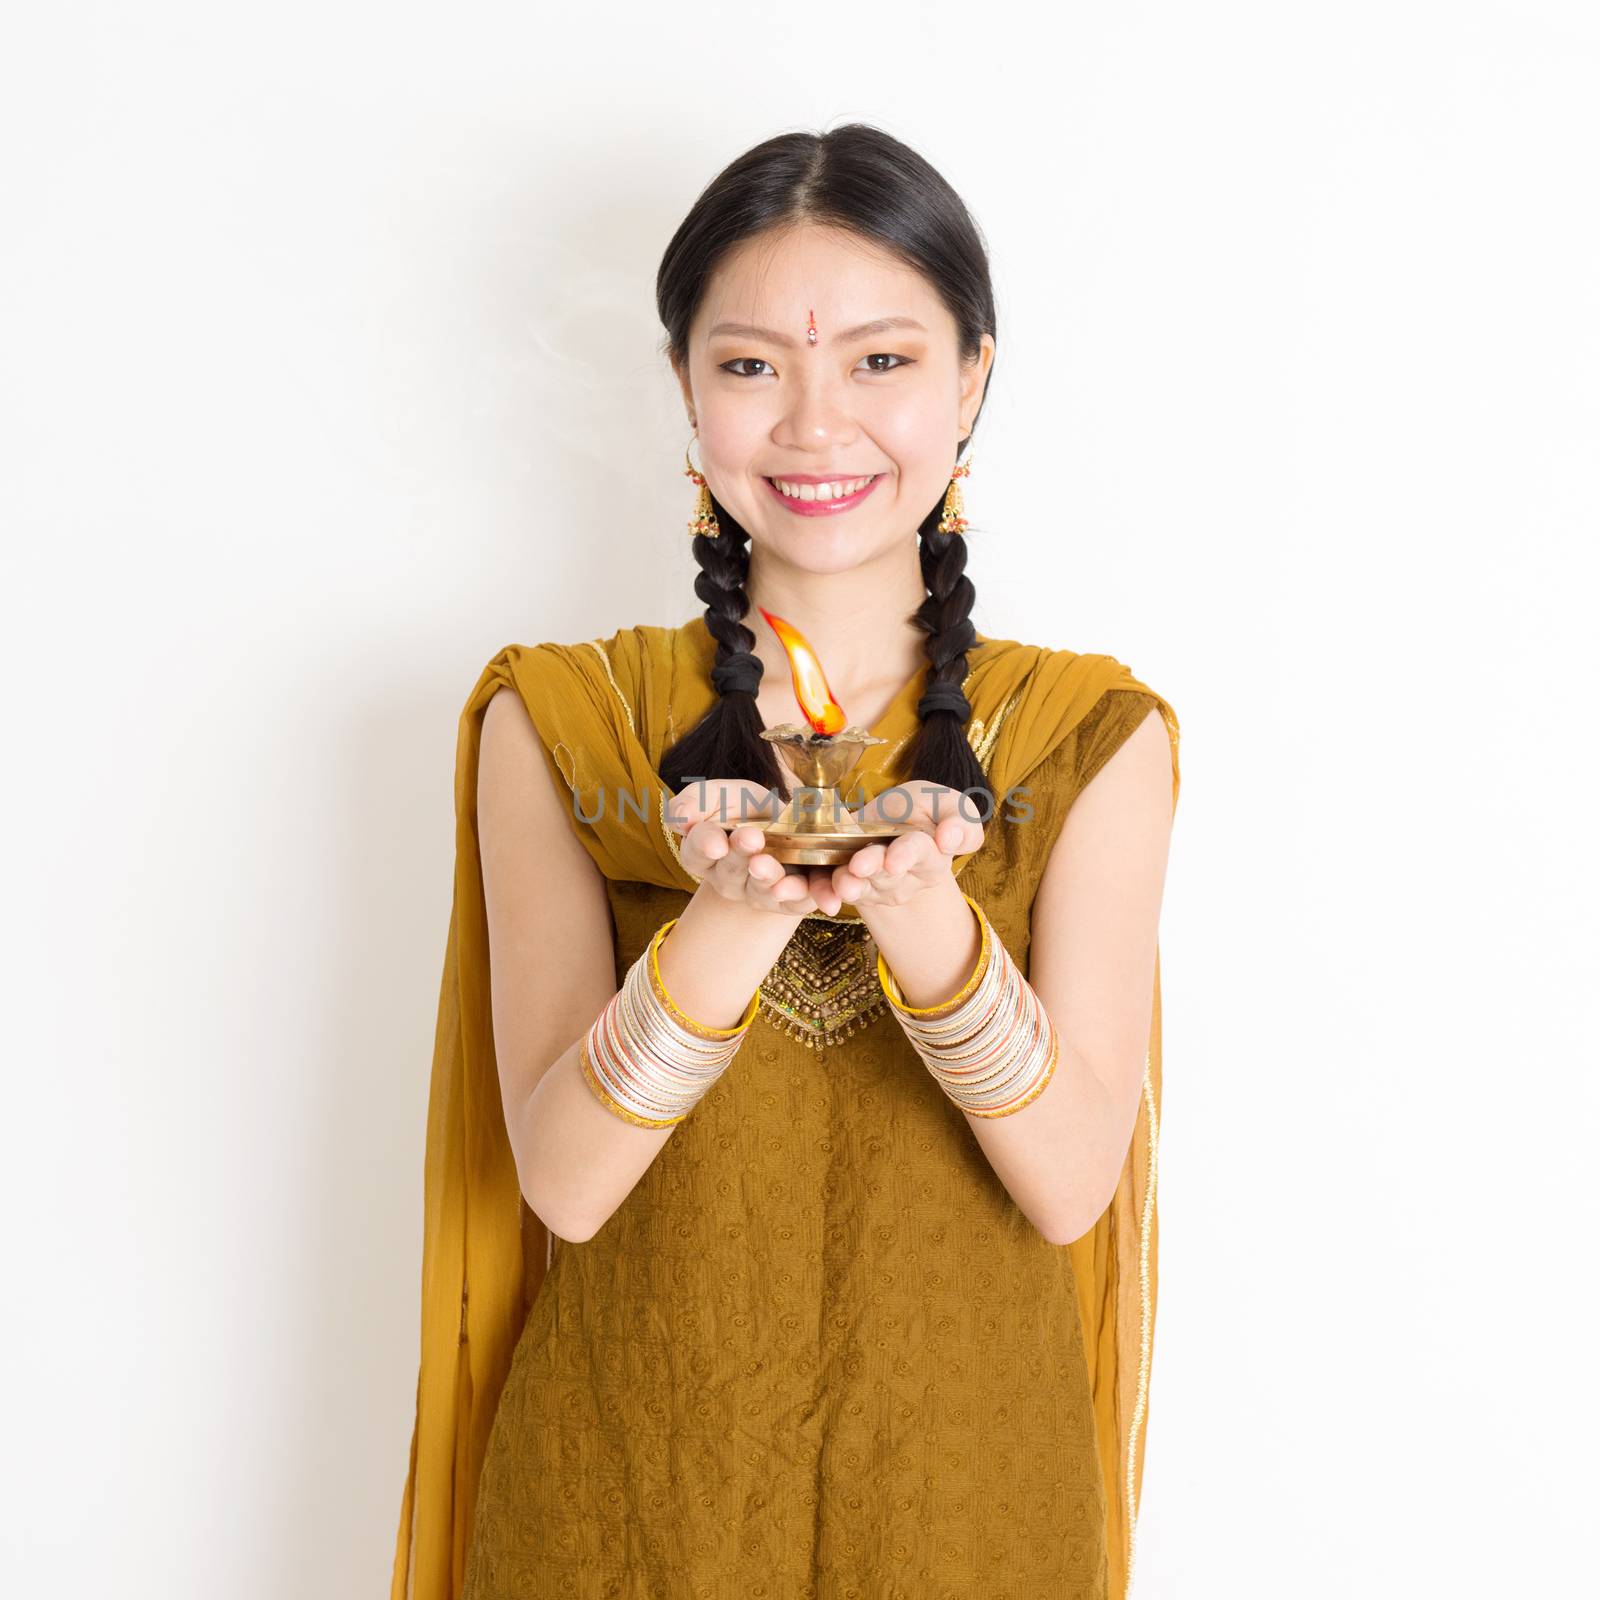 Mixed race Indian Chinese girl in traditional dress hands holding diya oil lamp and celebrating Diwali or deepavali, fesitval of lights.